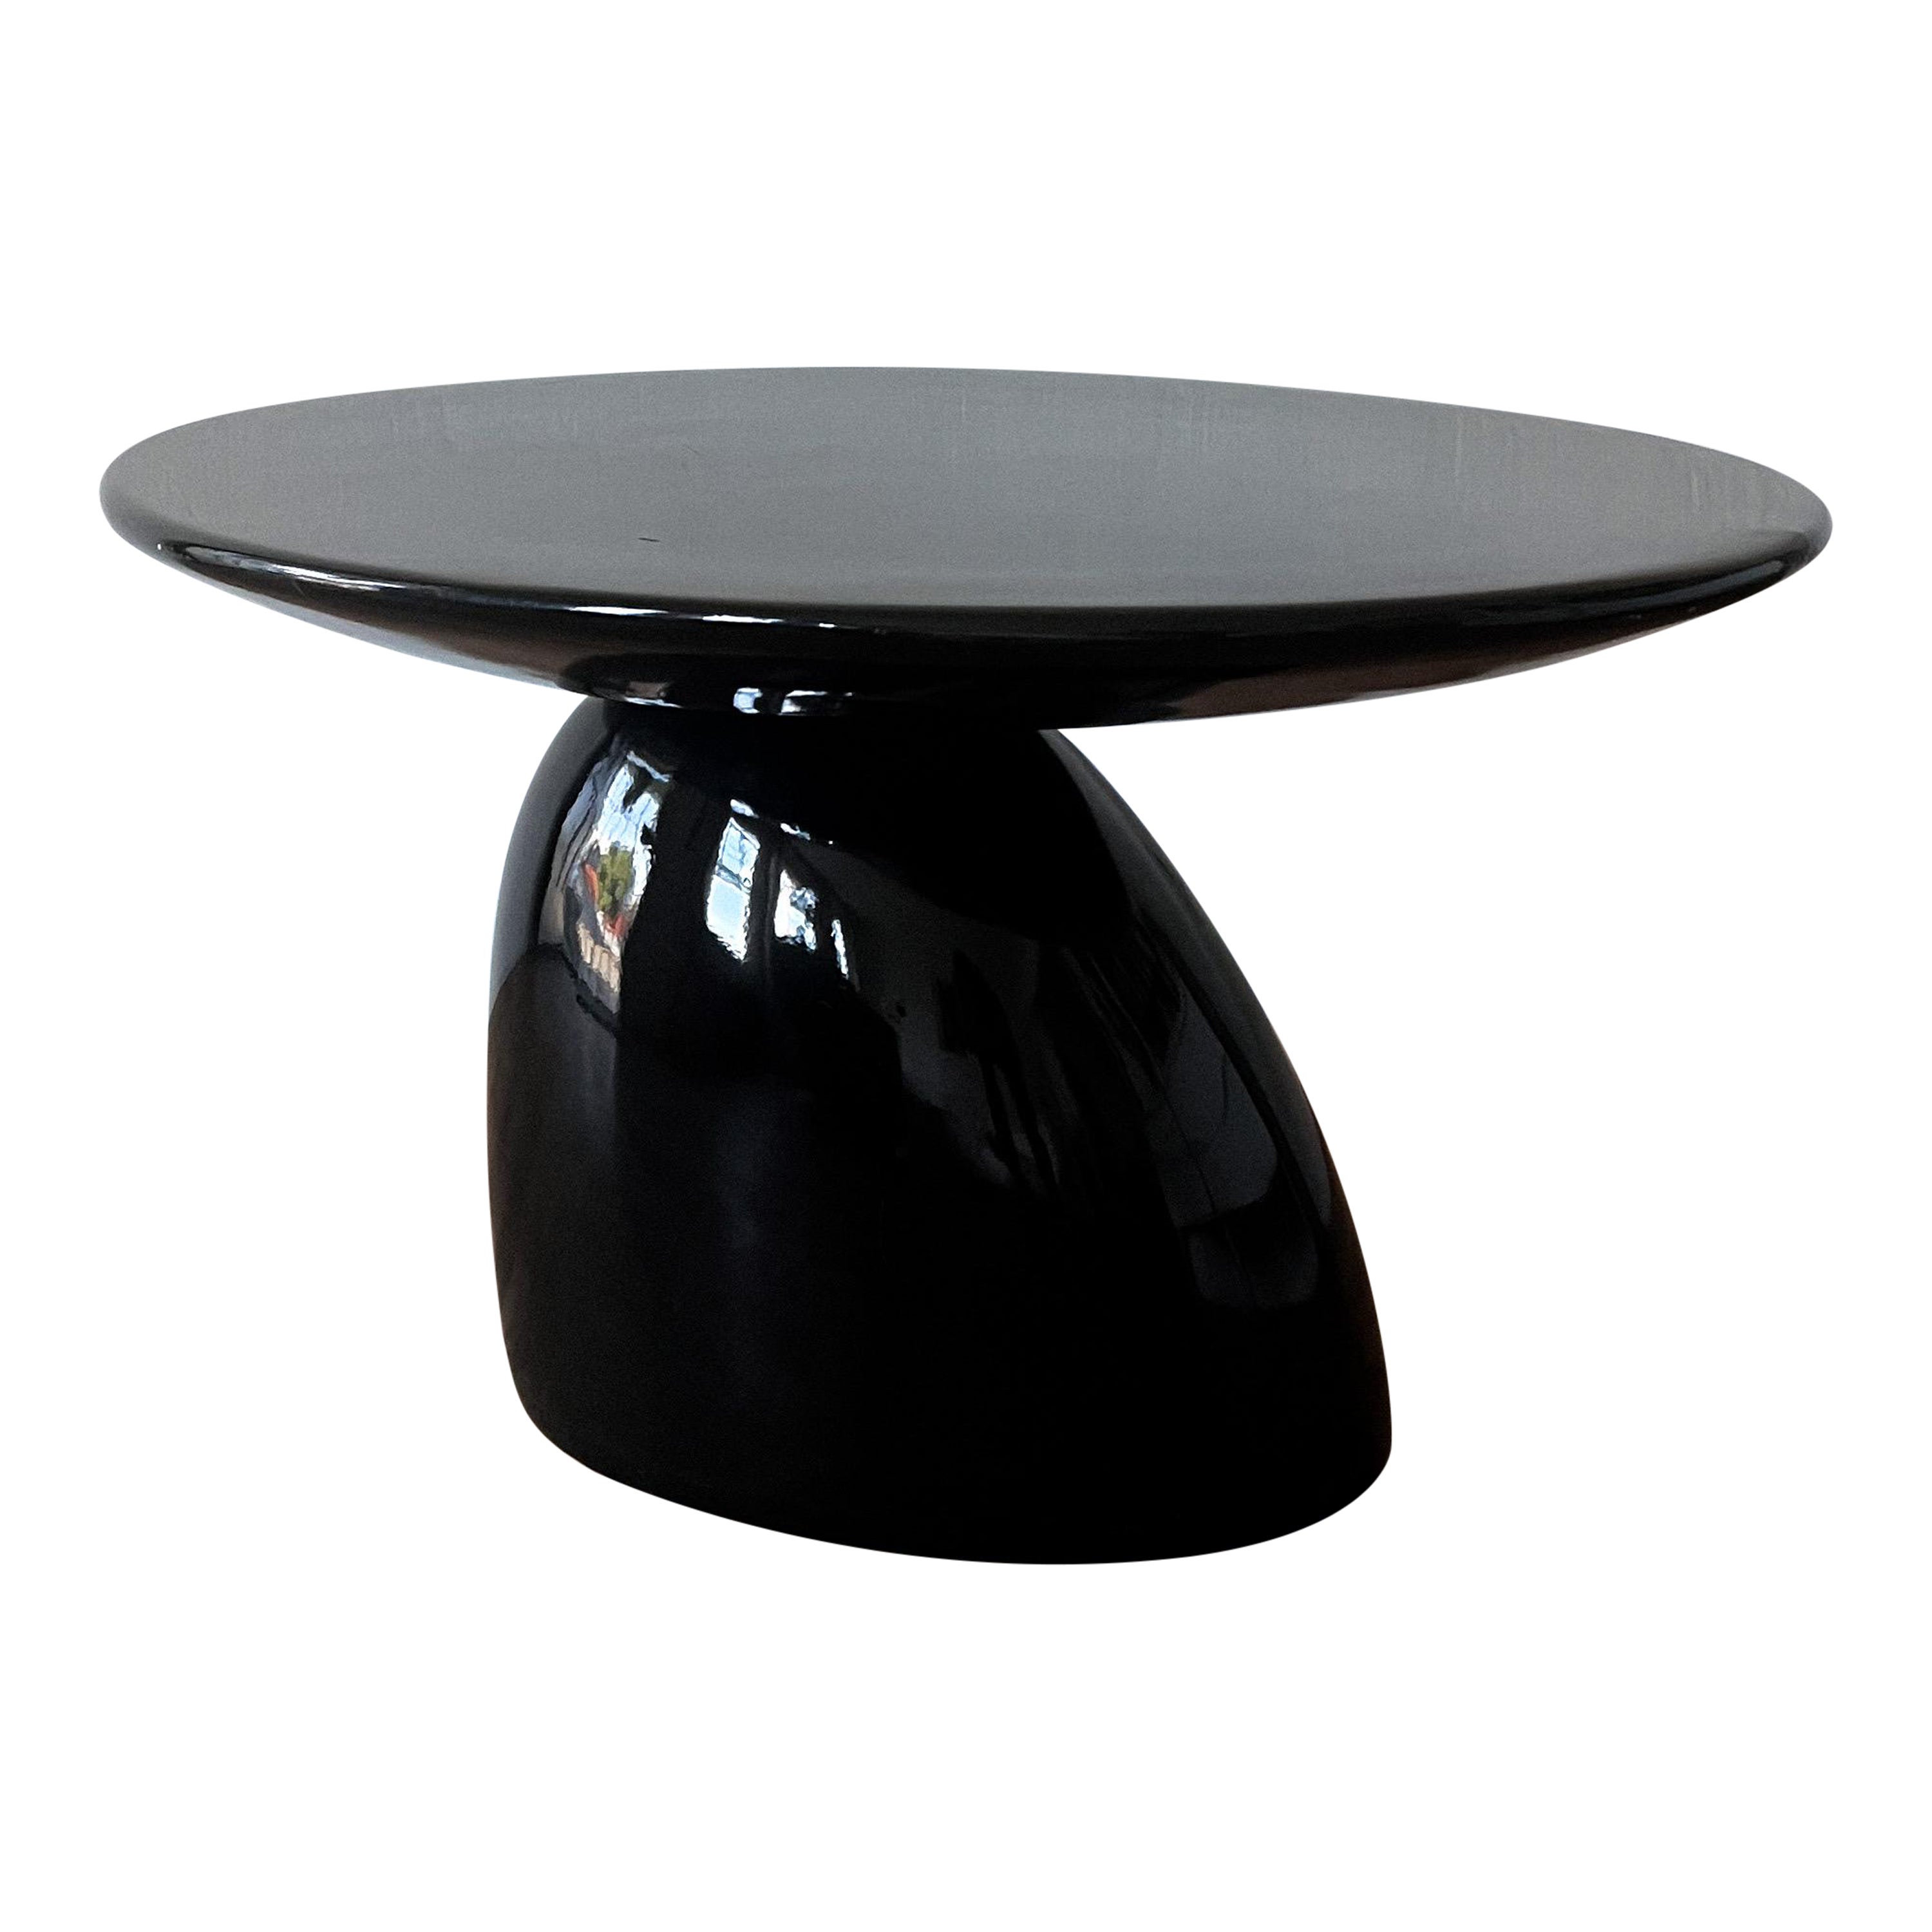 Space Age “Parabel” Style Side Table Attributed to Eero Aarnio